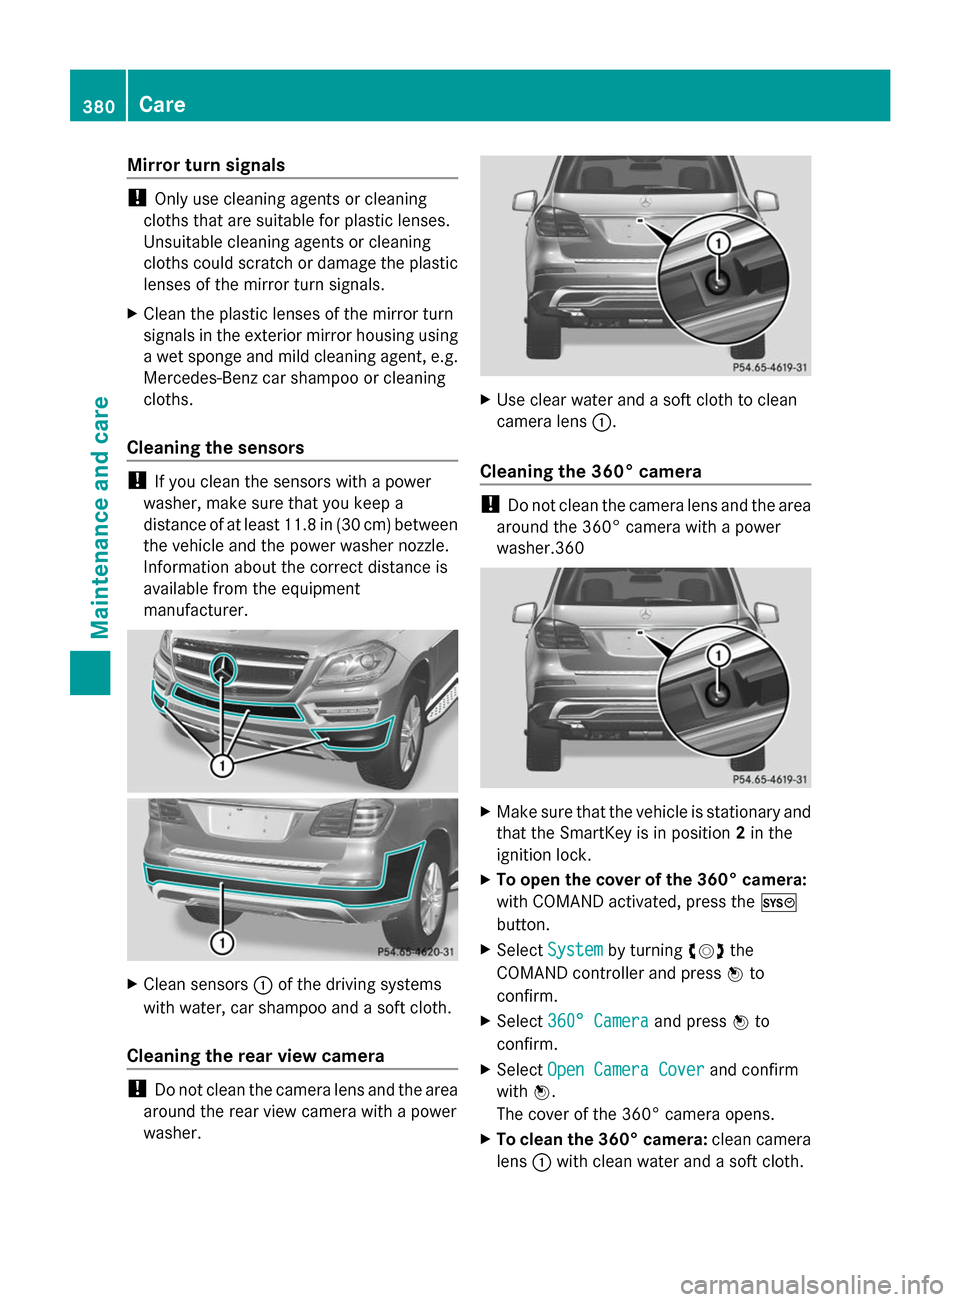 MERCEDES-BENZ GL-Class 2014 X166 Owners Guide Mirror turn signals
!
Only use cleaning agents or cleaning
cloths that are suitable for plastic lenses.
Unsuitable cleaning agents or cleaning
cloths could scratch or damage the plastic
lenses of the 